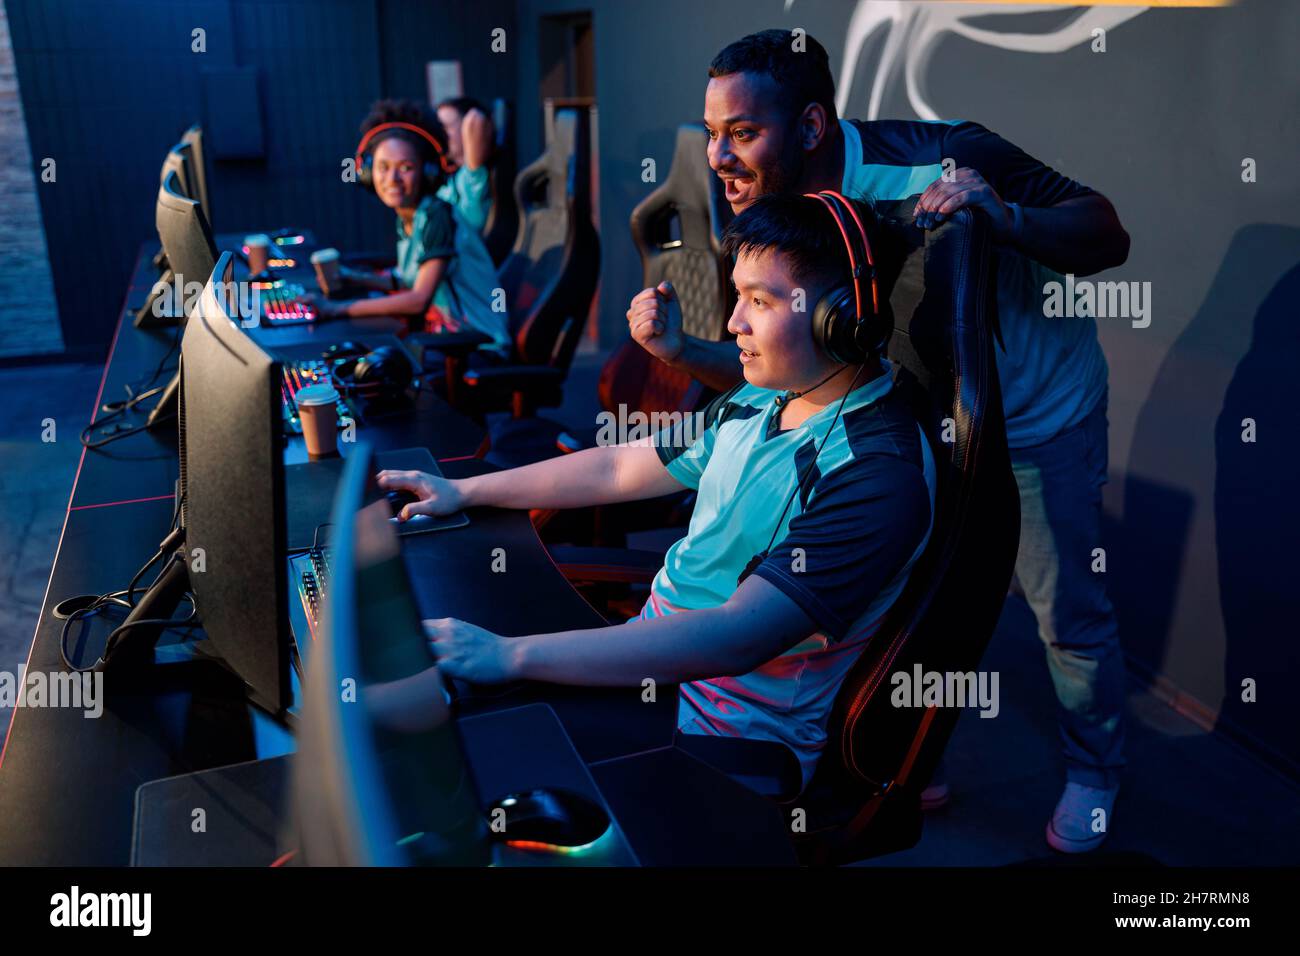 Professional esports players playing online games in internet cafe Stock Photo